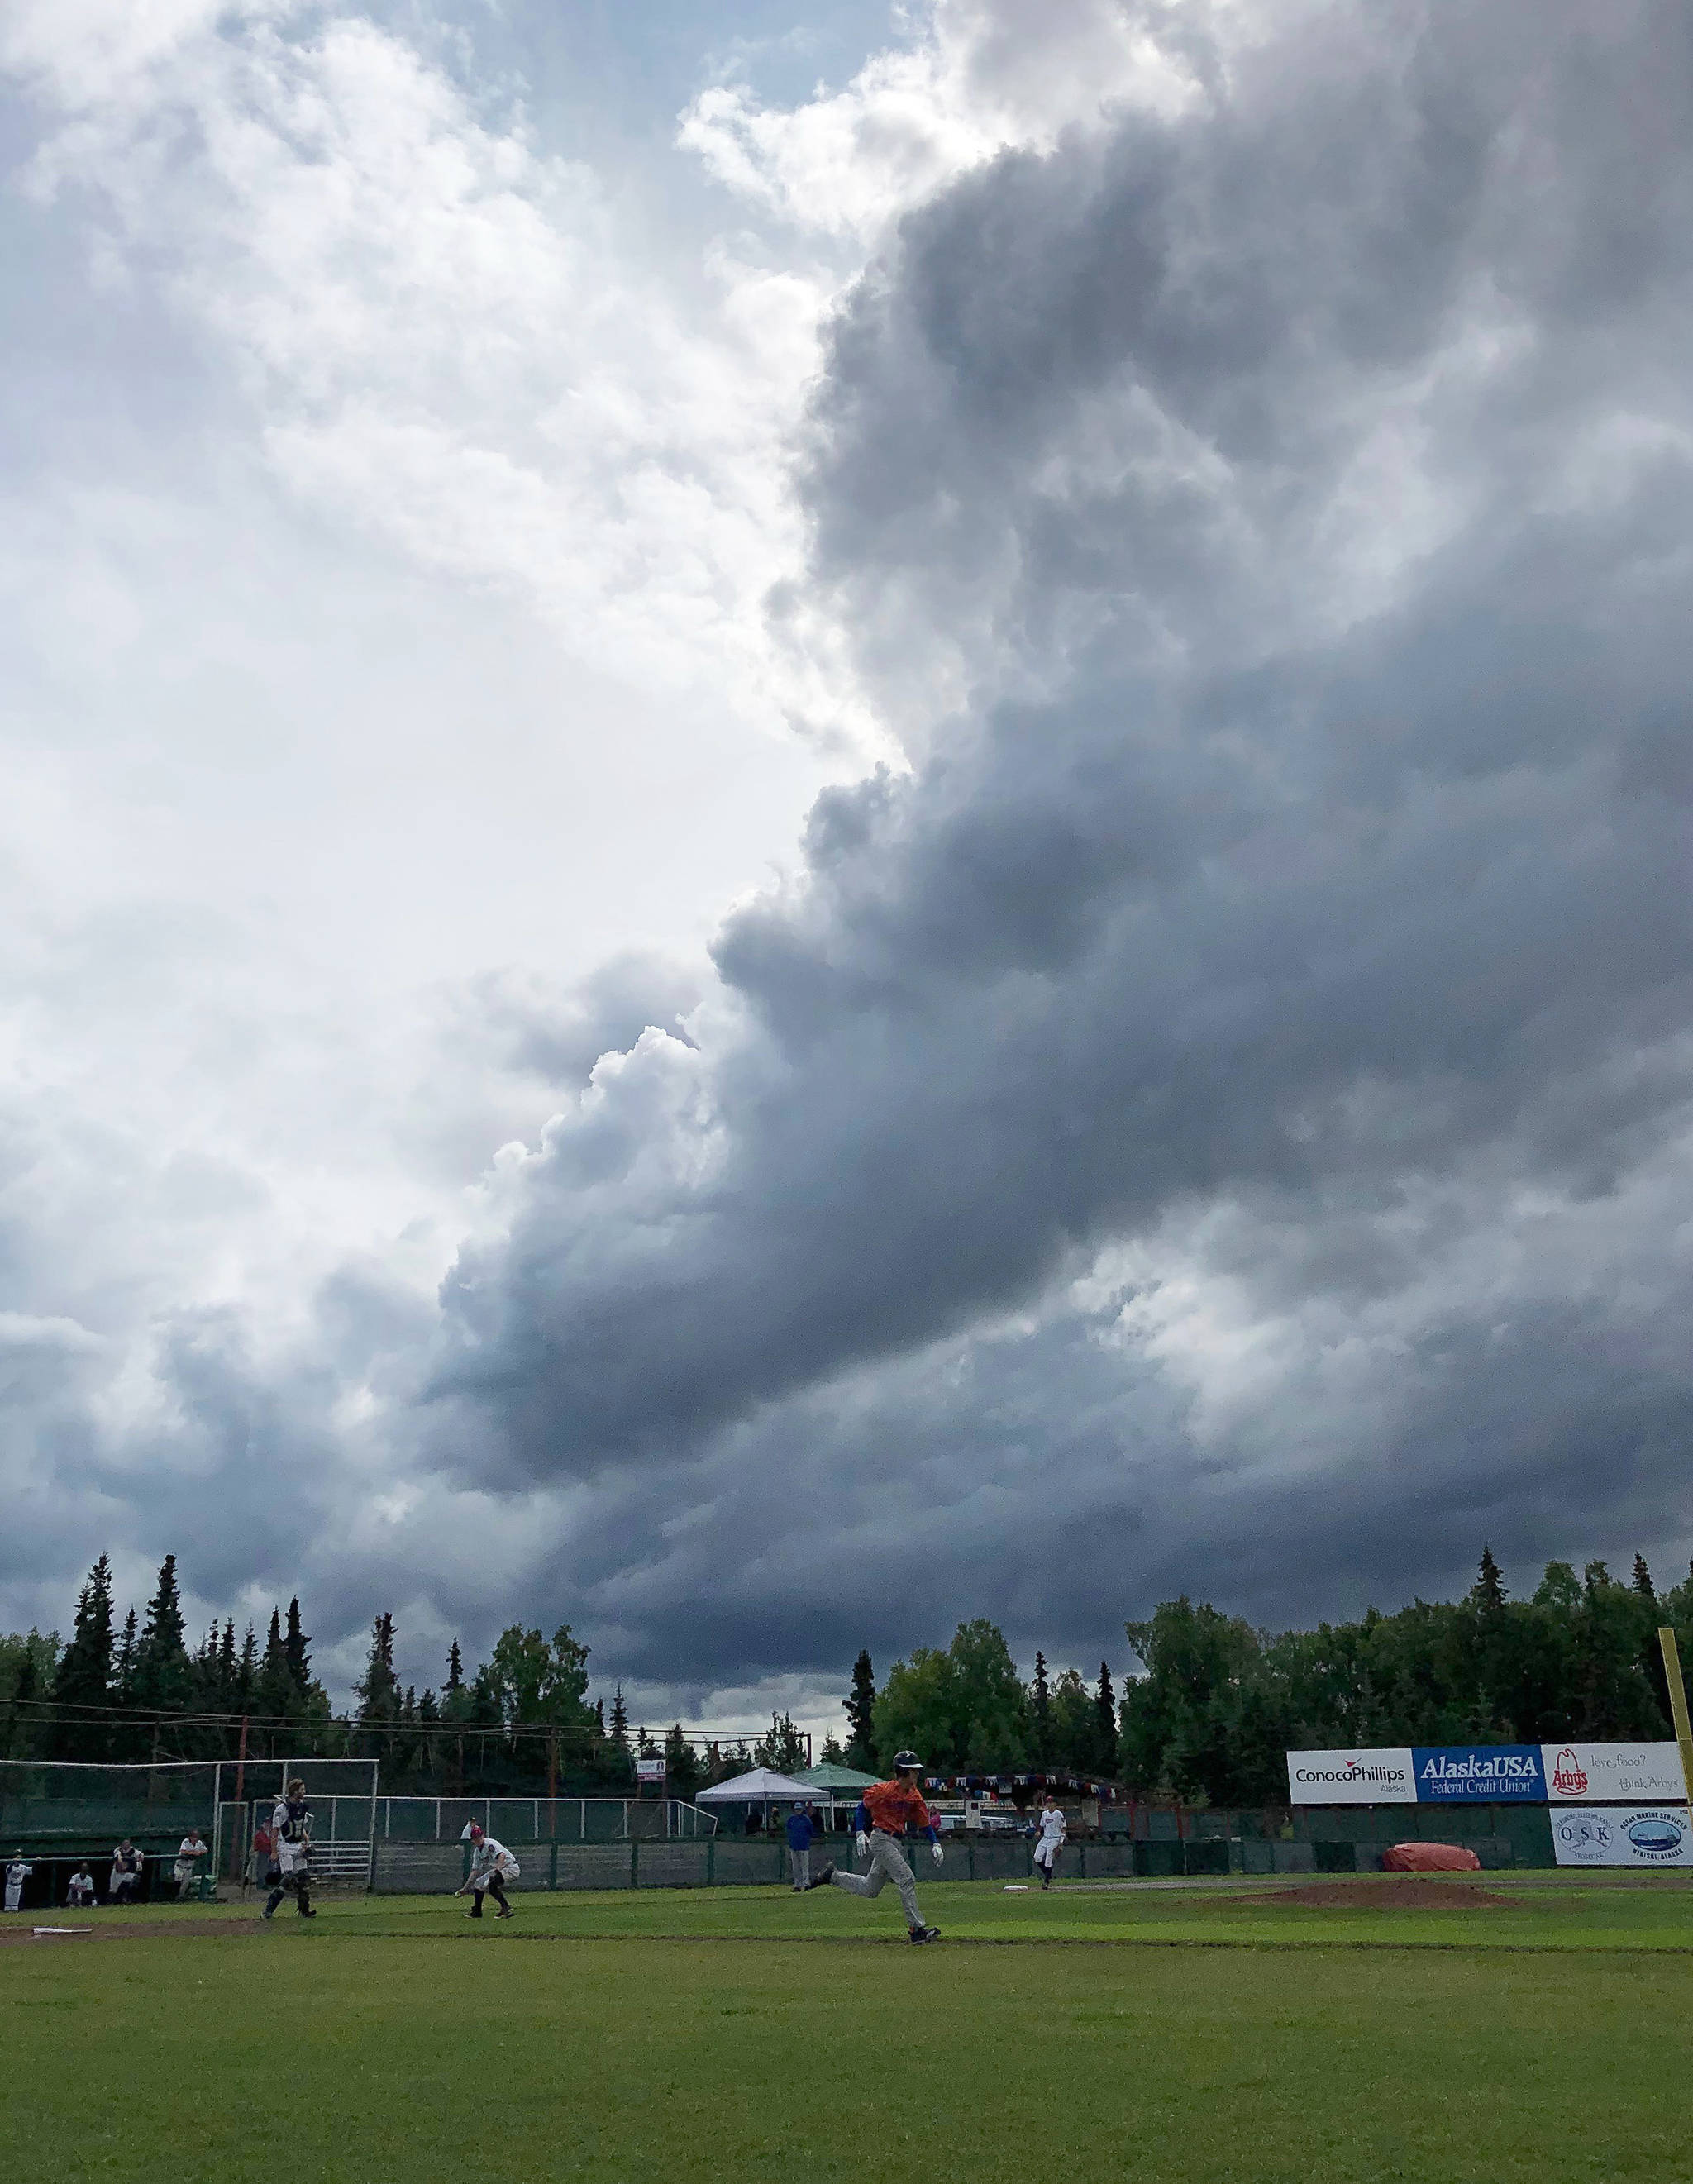 The Legion Twins and Palmer Moose resume play after a passing shower soaked the field Tuesday, July 16, 2019, at Coral Seymour Memorial Park in Kenai, Alaska. (Photo by Joey Klecka/Peninsula Clarion)